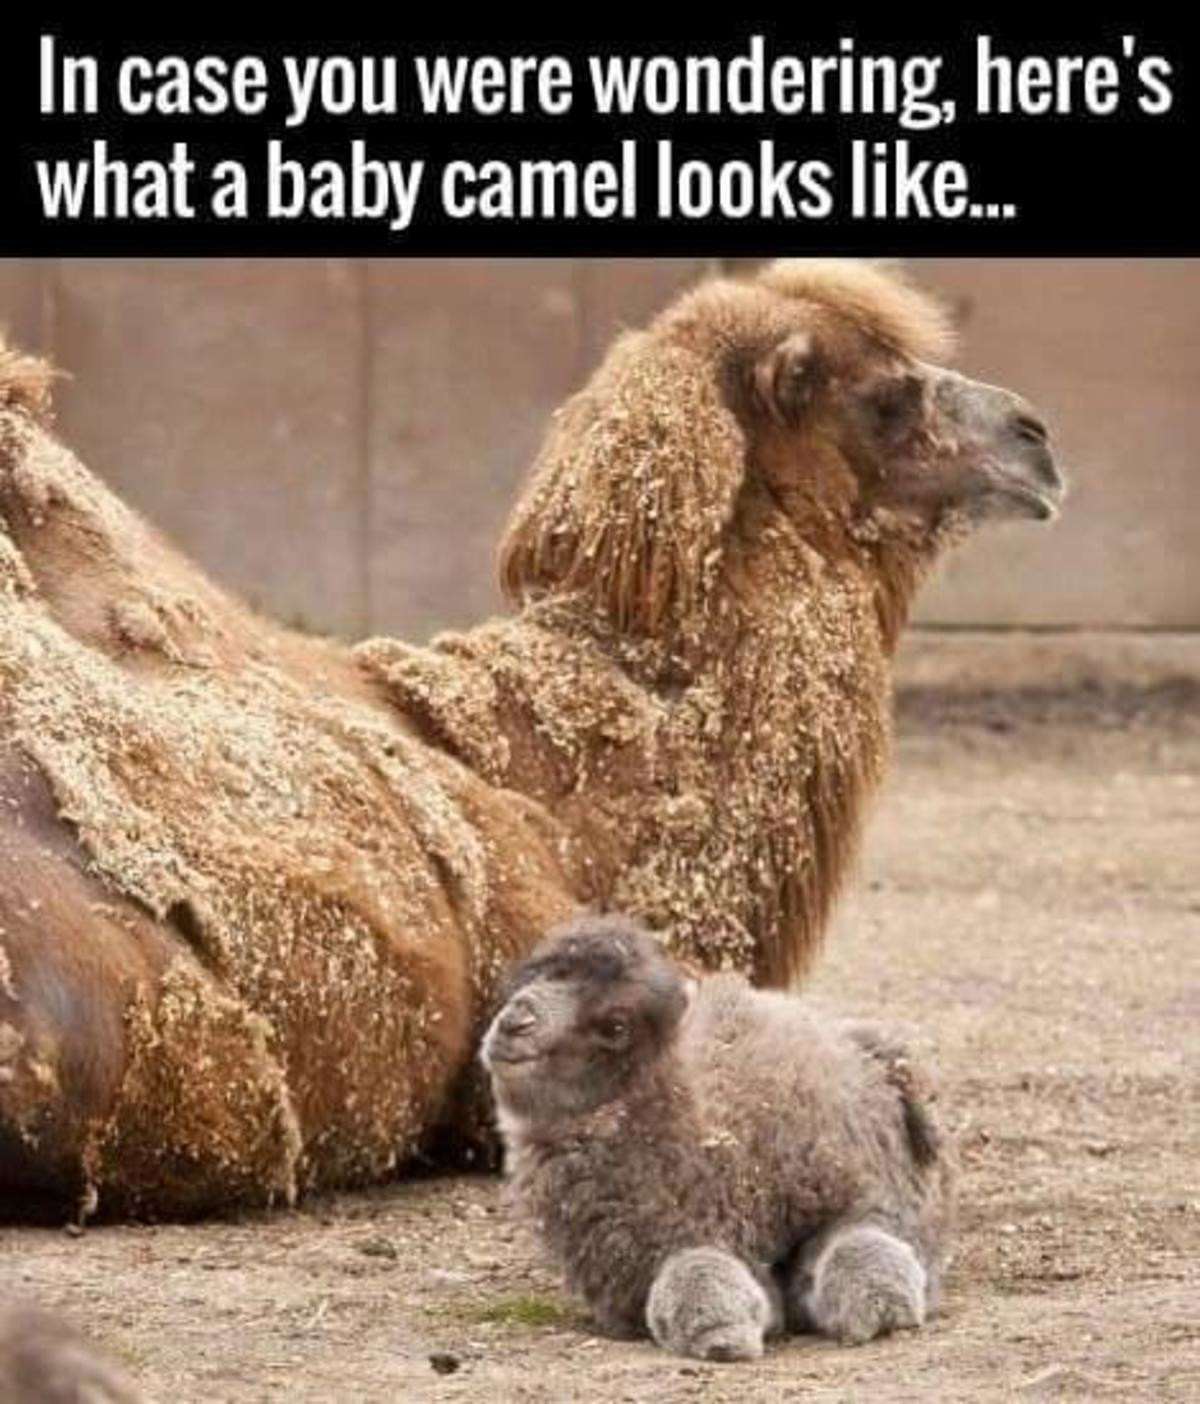 baby camels - In case you were wondering, here's what a baby camel looks ...